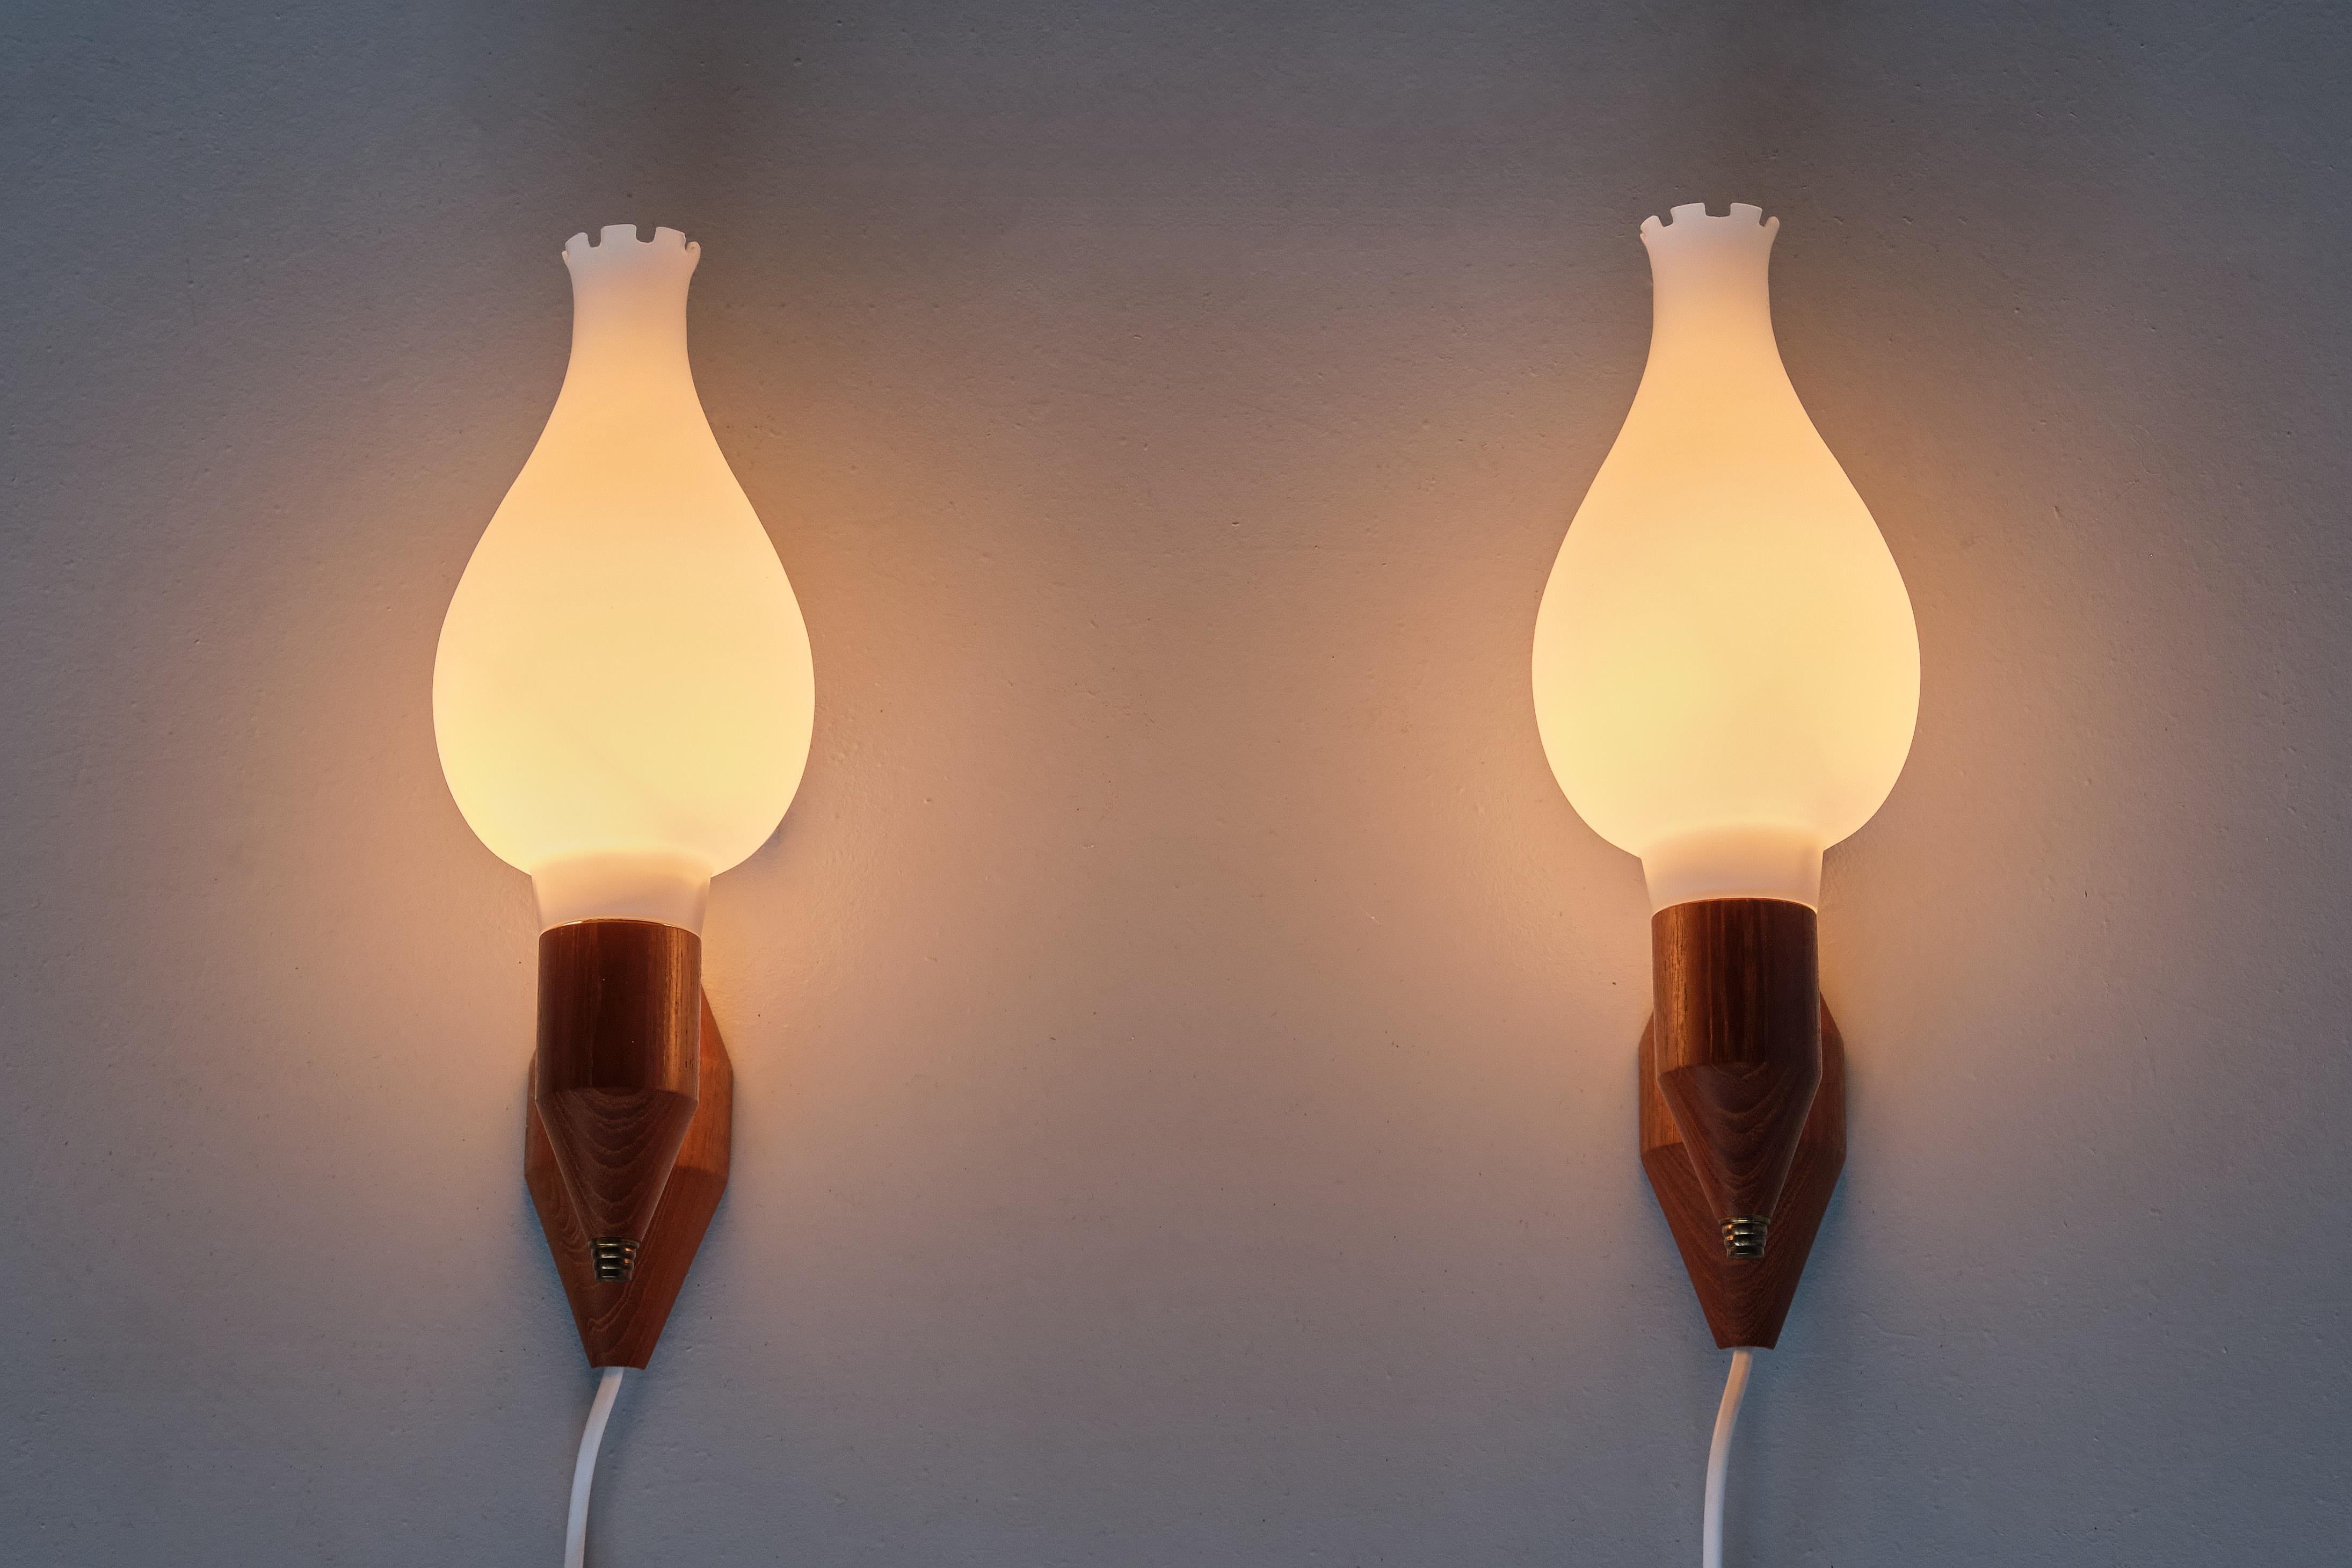 Mid-20th Century Swedish Modern Wall Lamps in Teak Wood, Brass and Opaline Glass, Sweden, 1950s For Sale